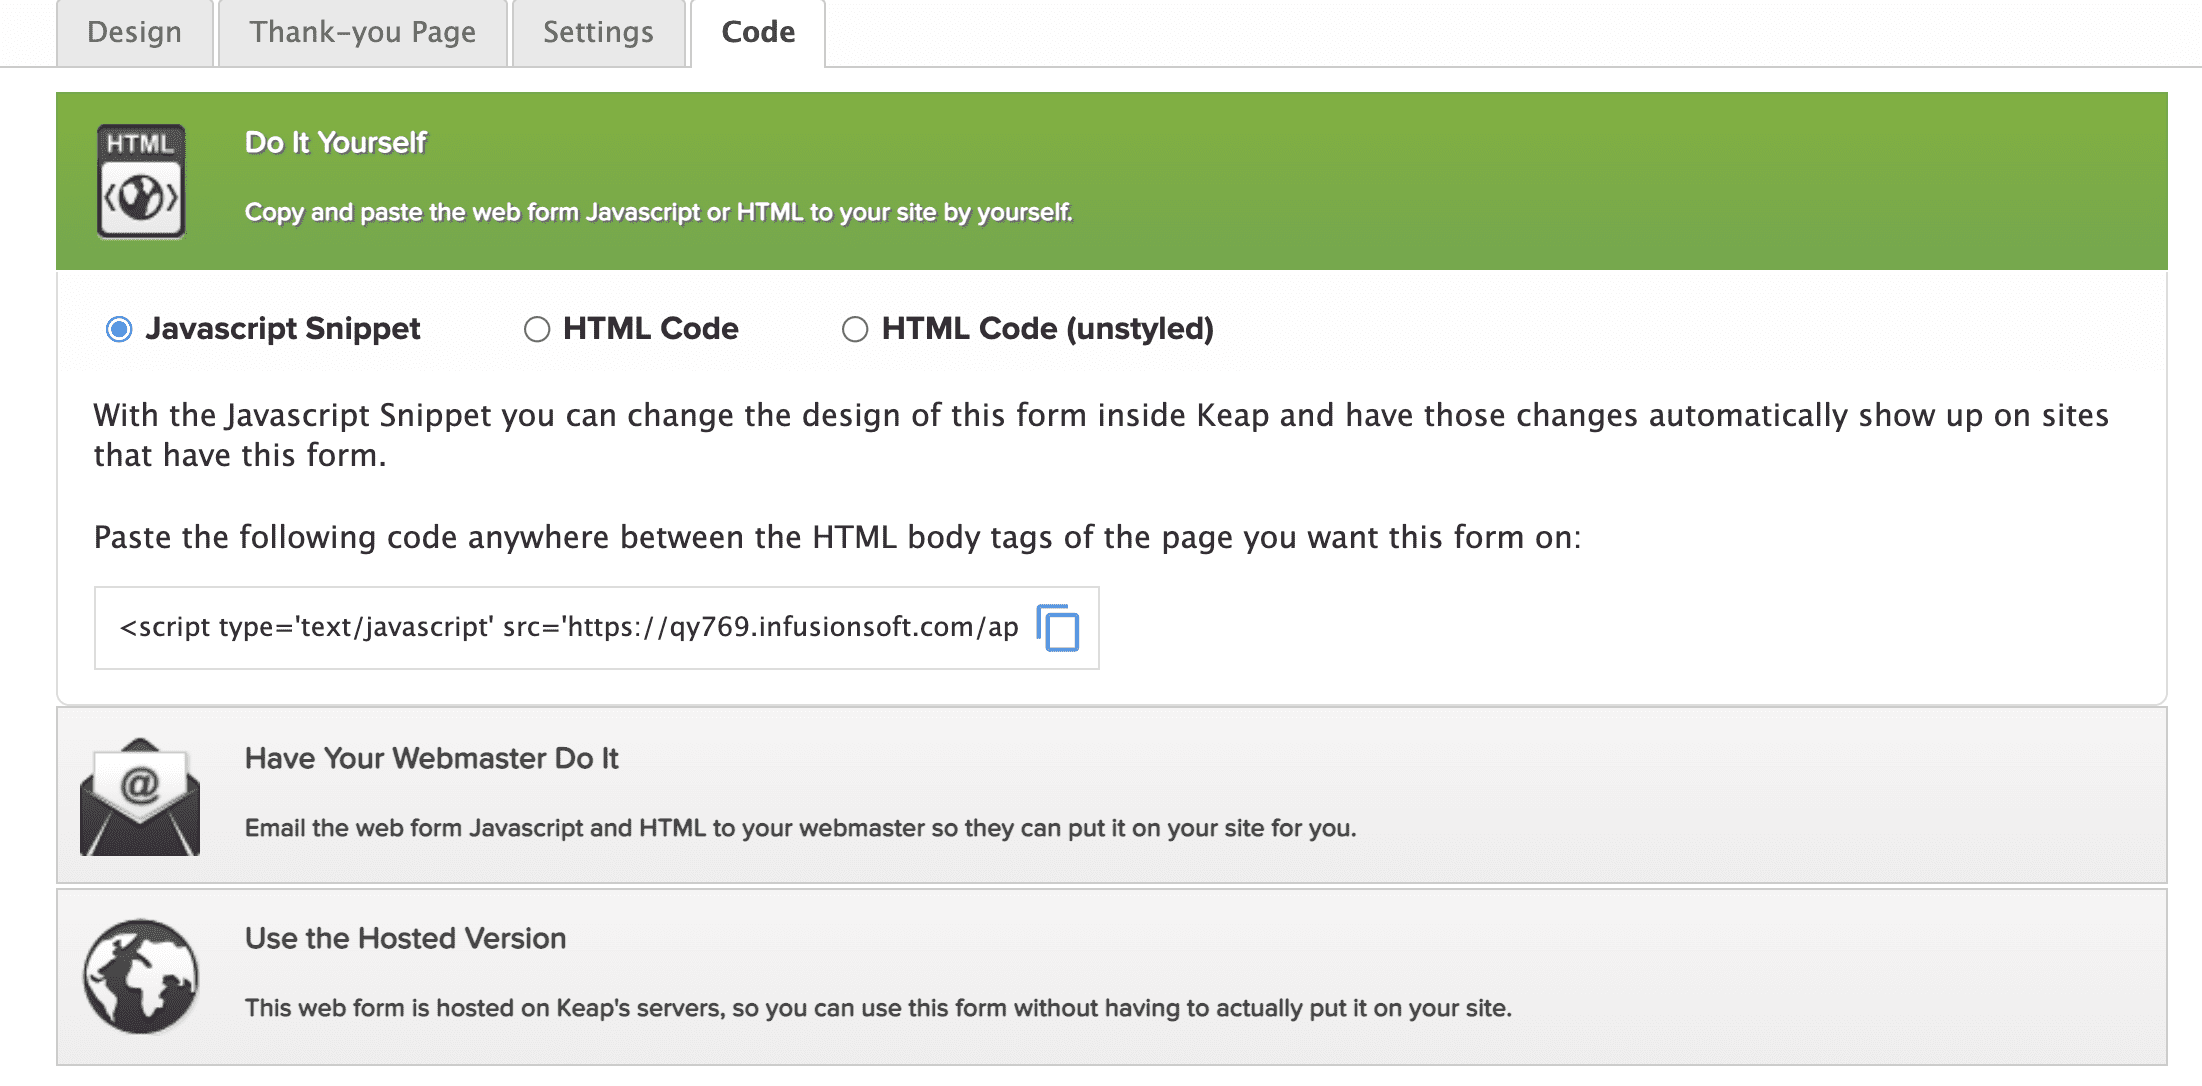 Once the web form is created in Keap, the user can grab the javascript snippet, HTML code, or HTML code (unstyled) to add to their website. The campaign will need to be published before seeing any changes.